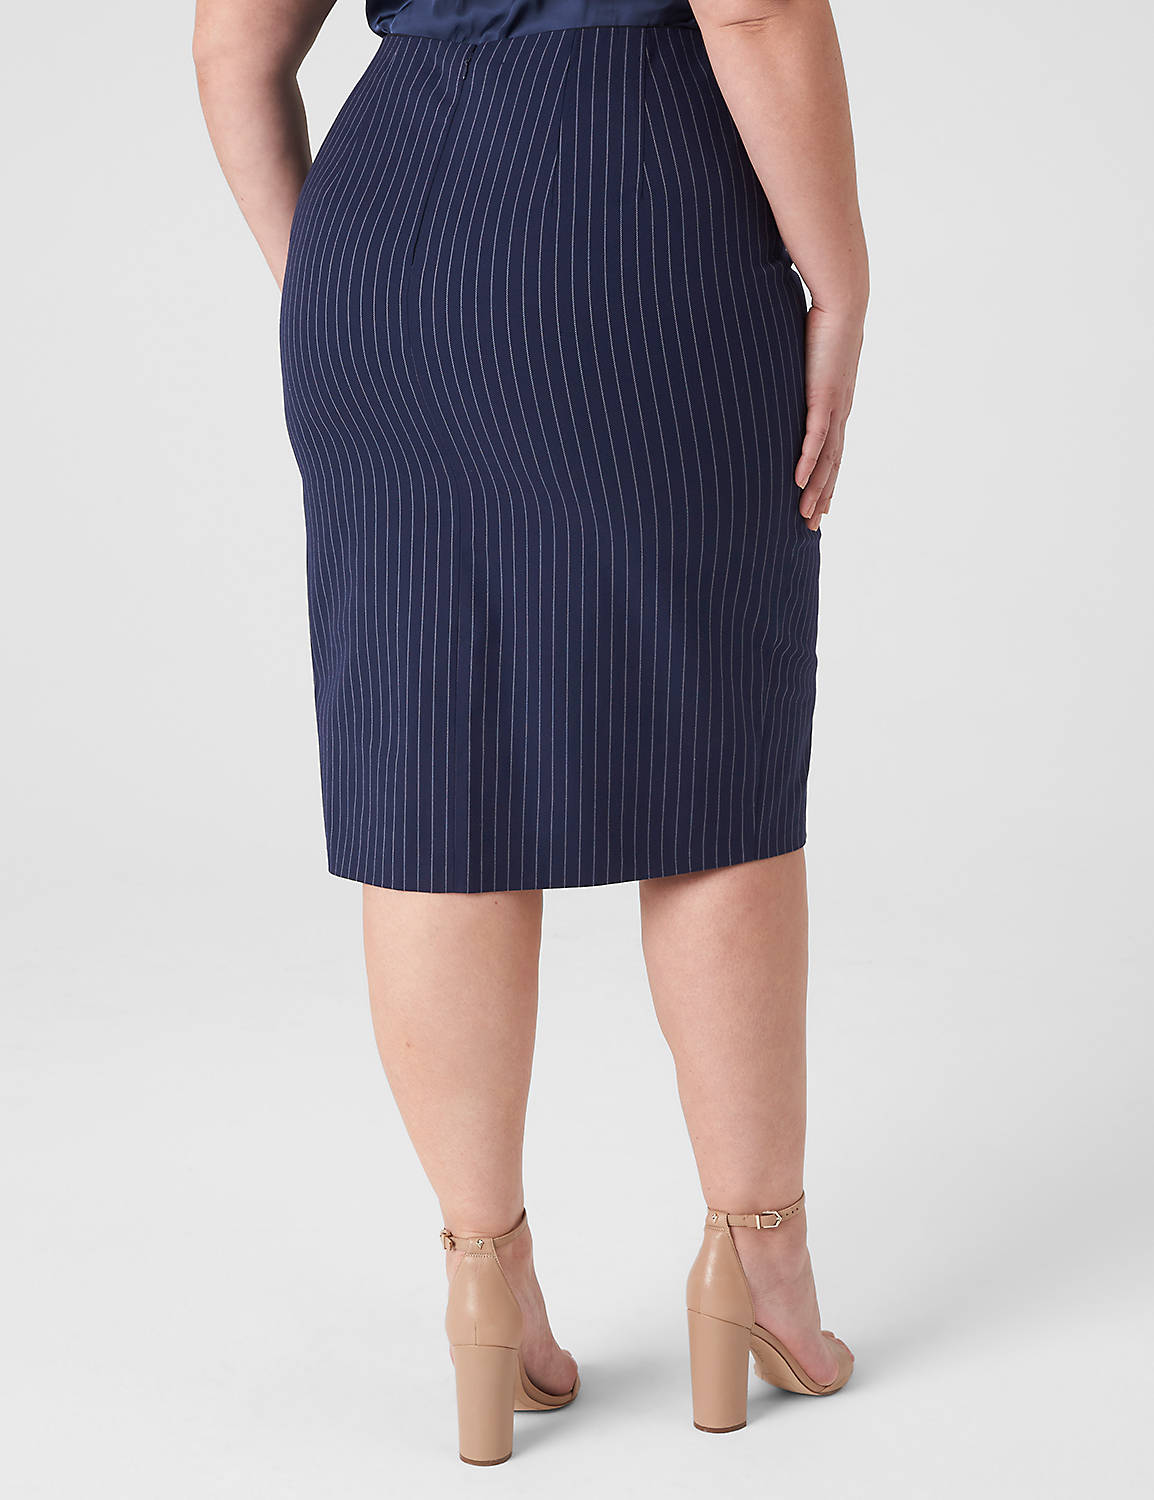 Pinstriped Bodycon with Belt 113587 Product Image 2